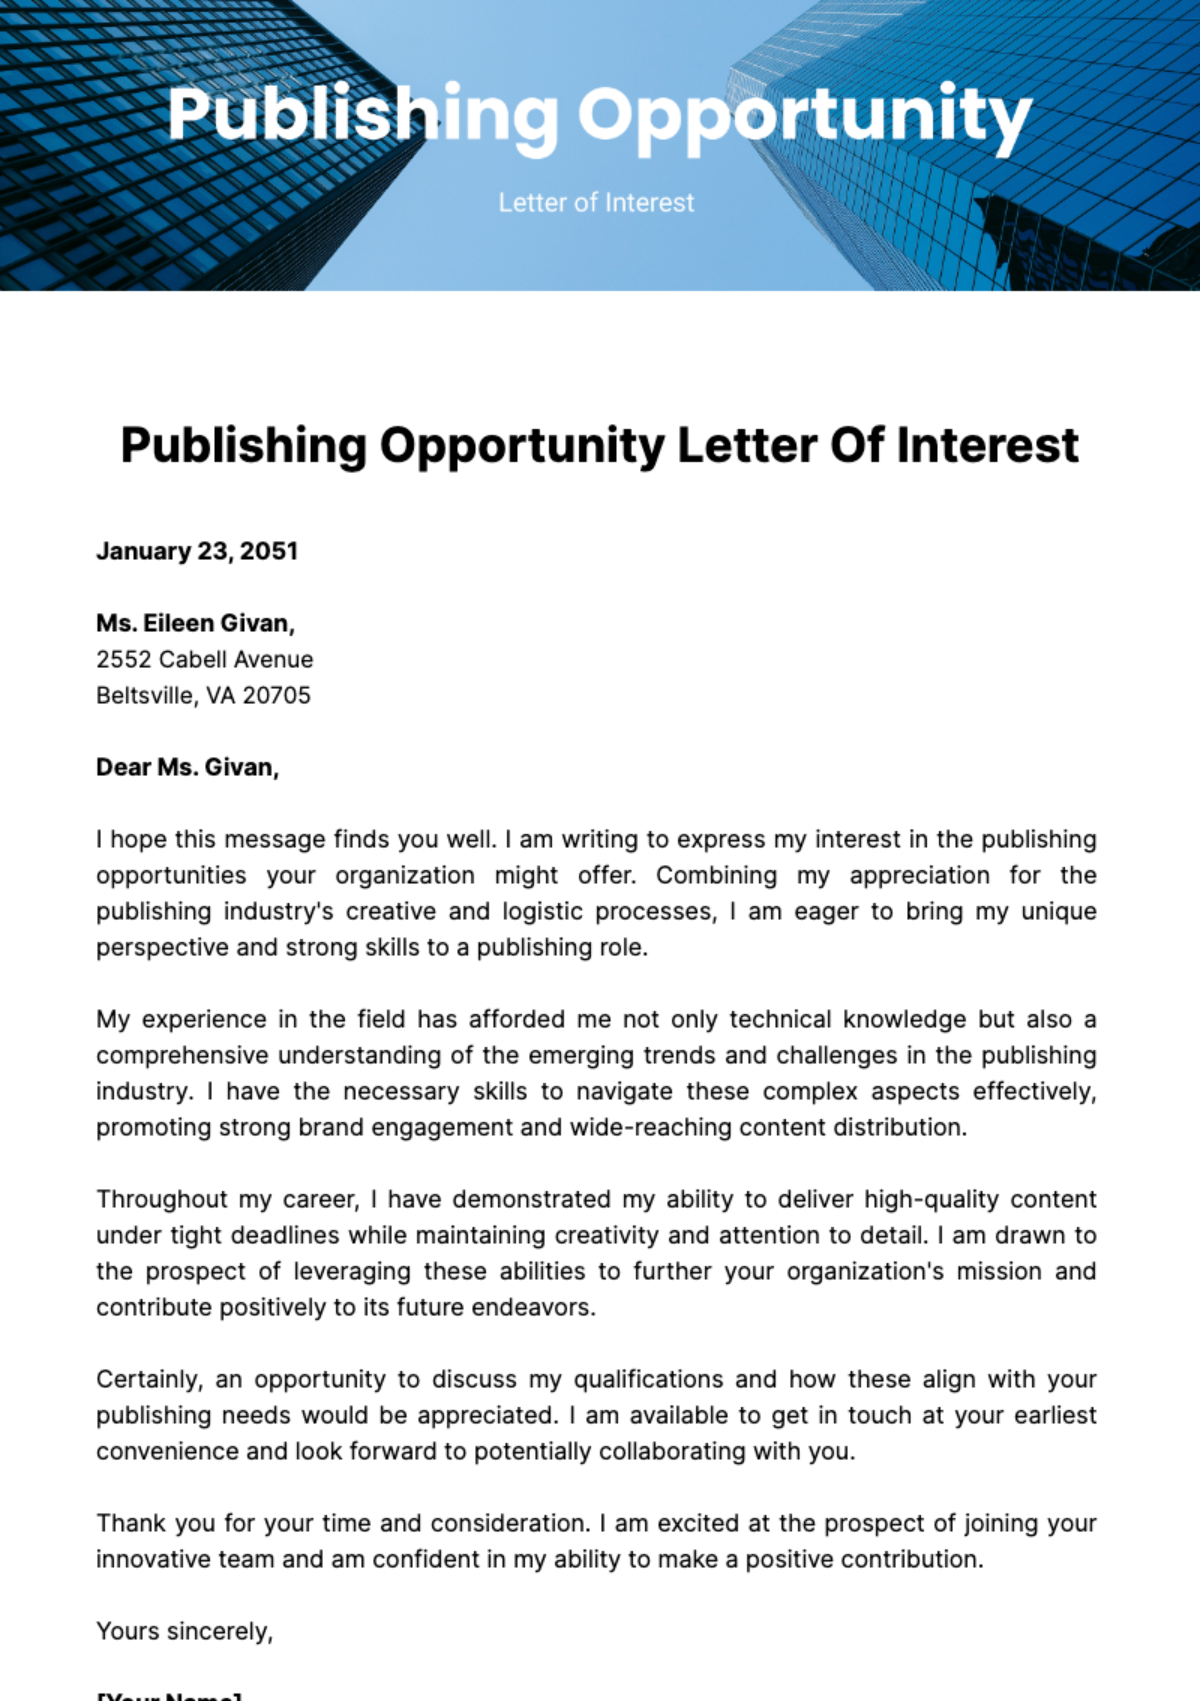 Publishing Opportunity Letter of Interest Template